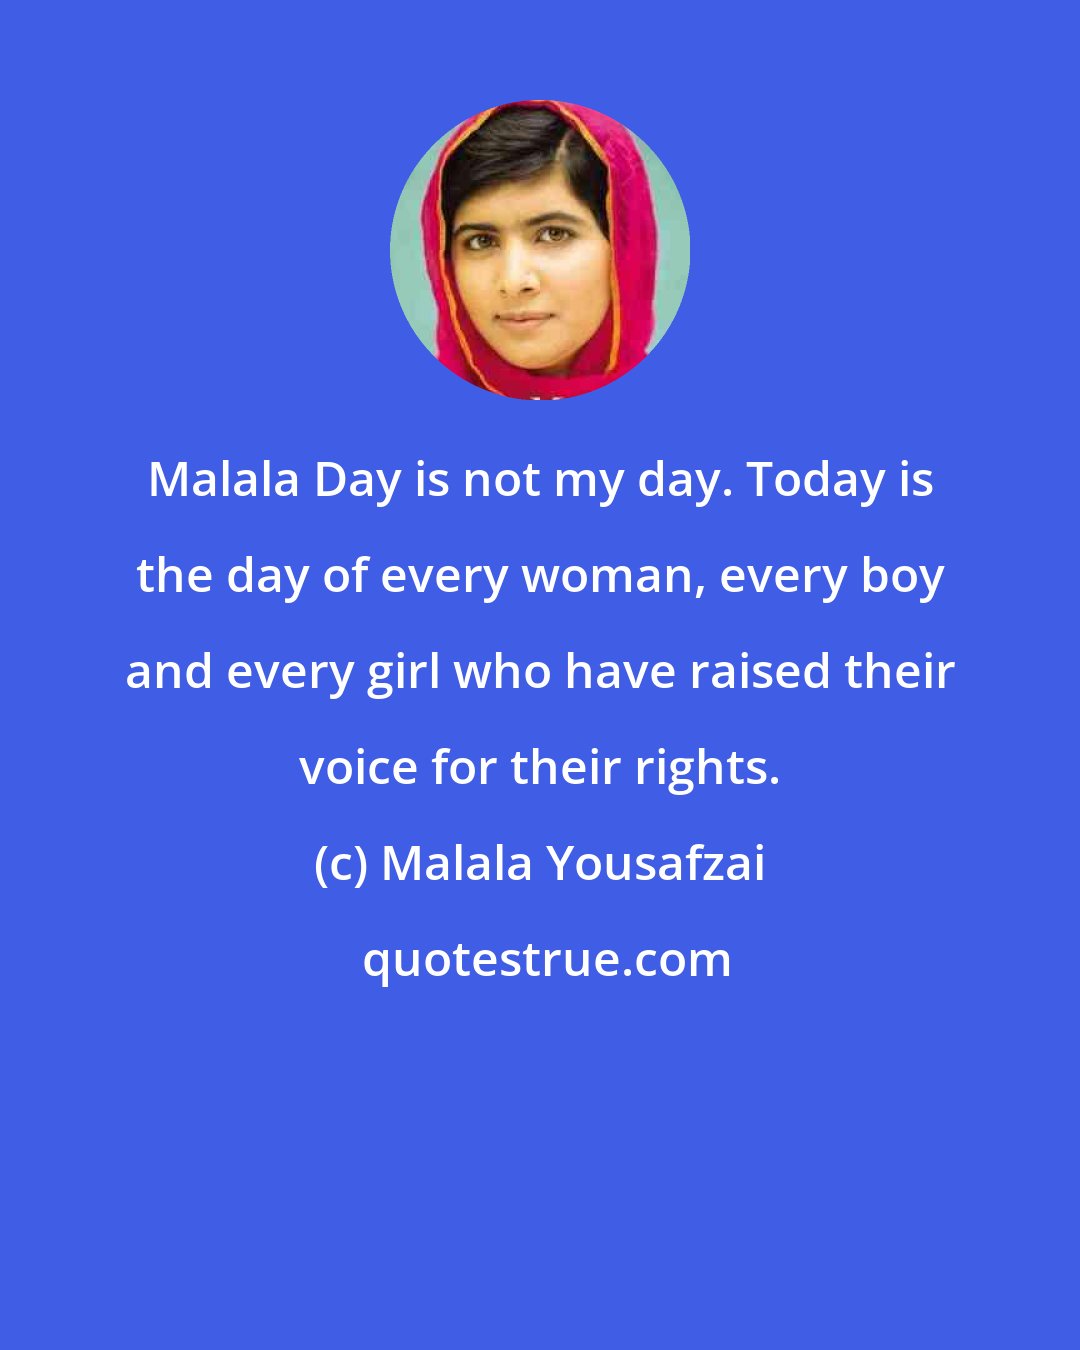 Malala Yousafzai: Malala Day is not my day. Today is the day of every woman, every boy and every girl who have raised their voice for their rights.